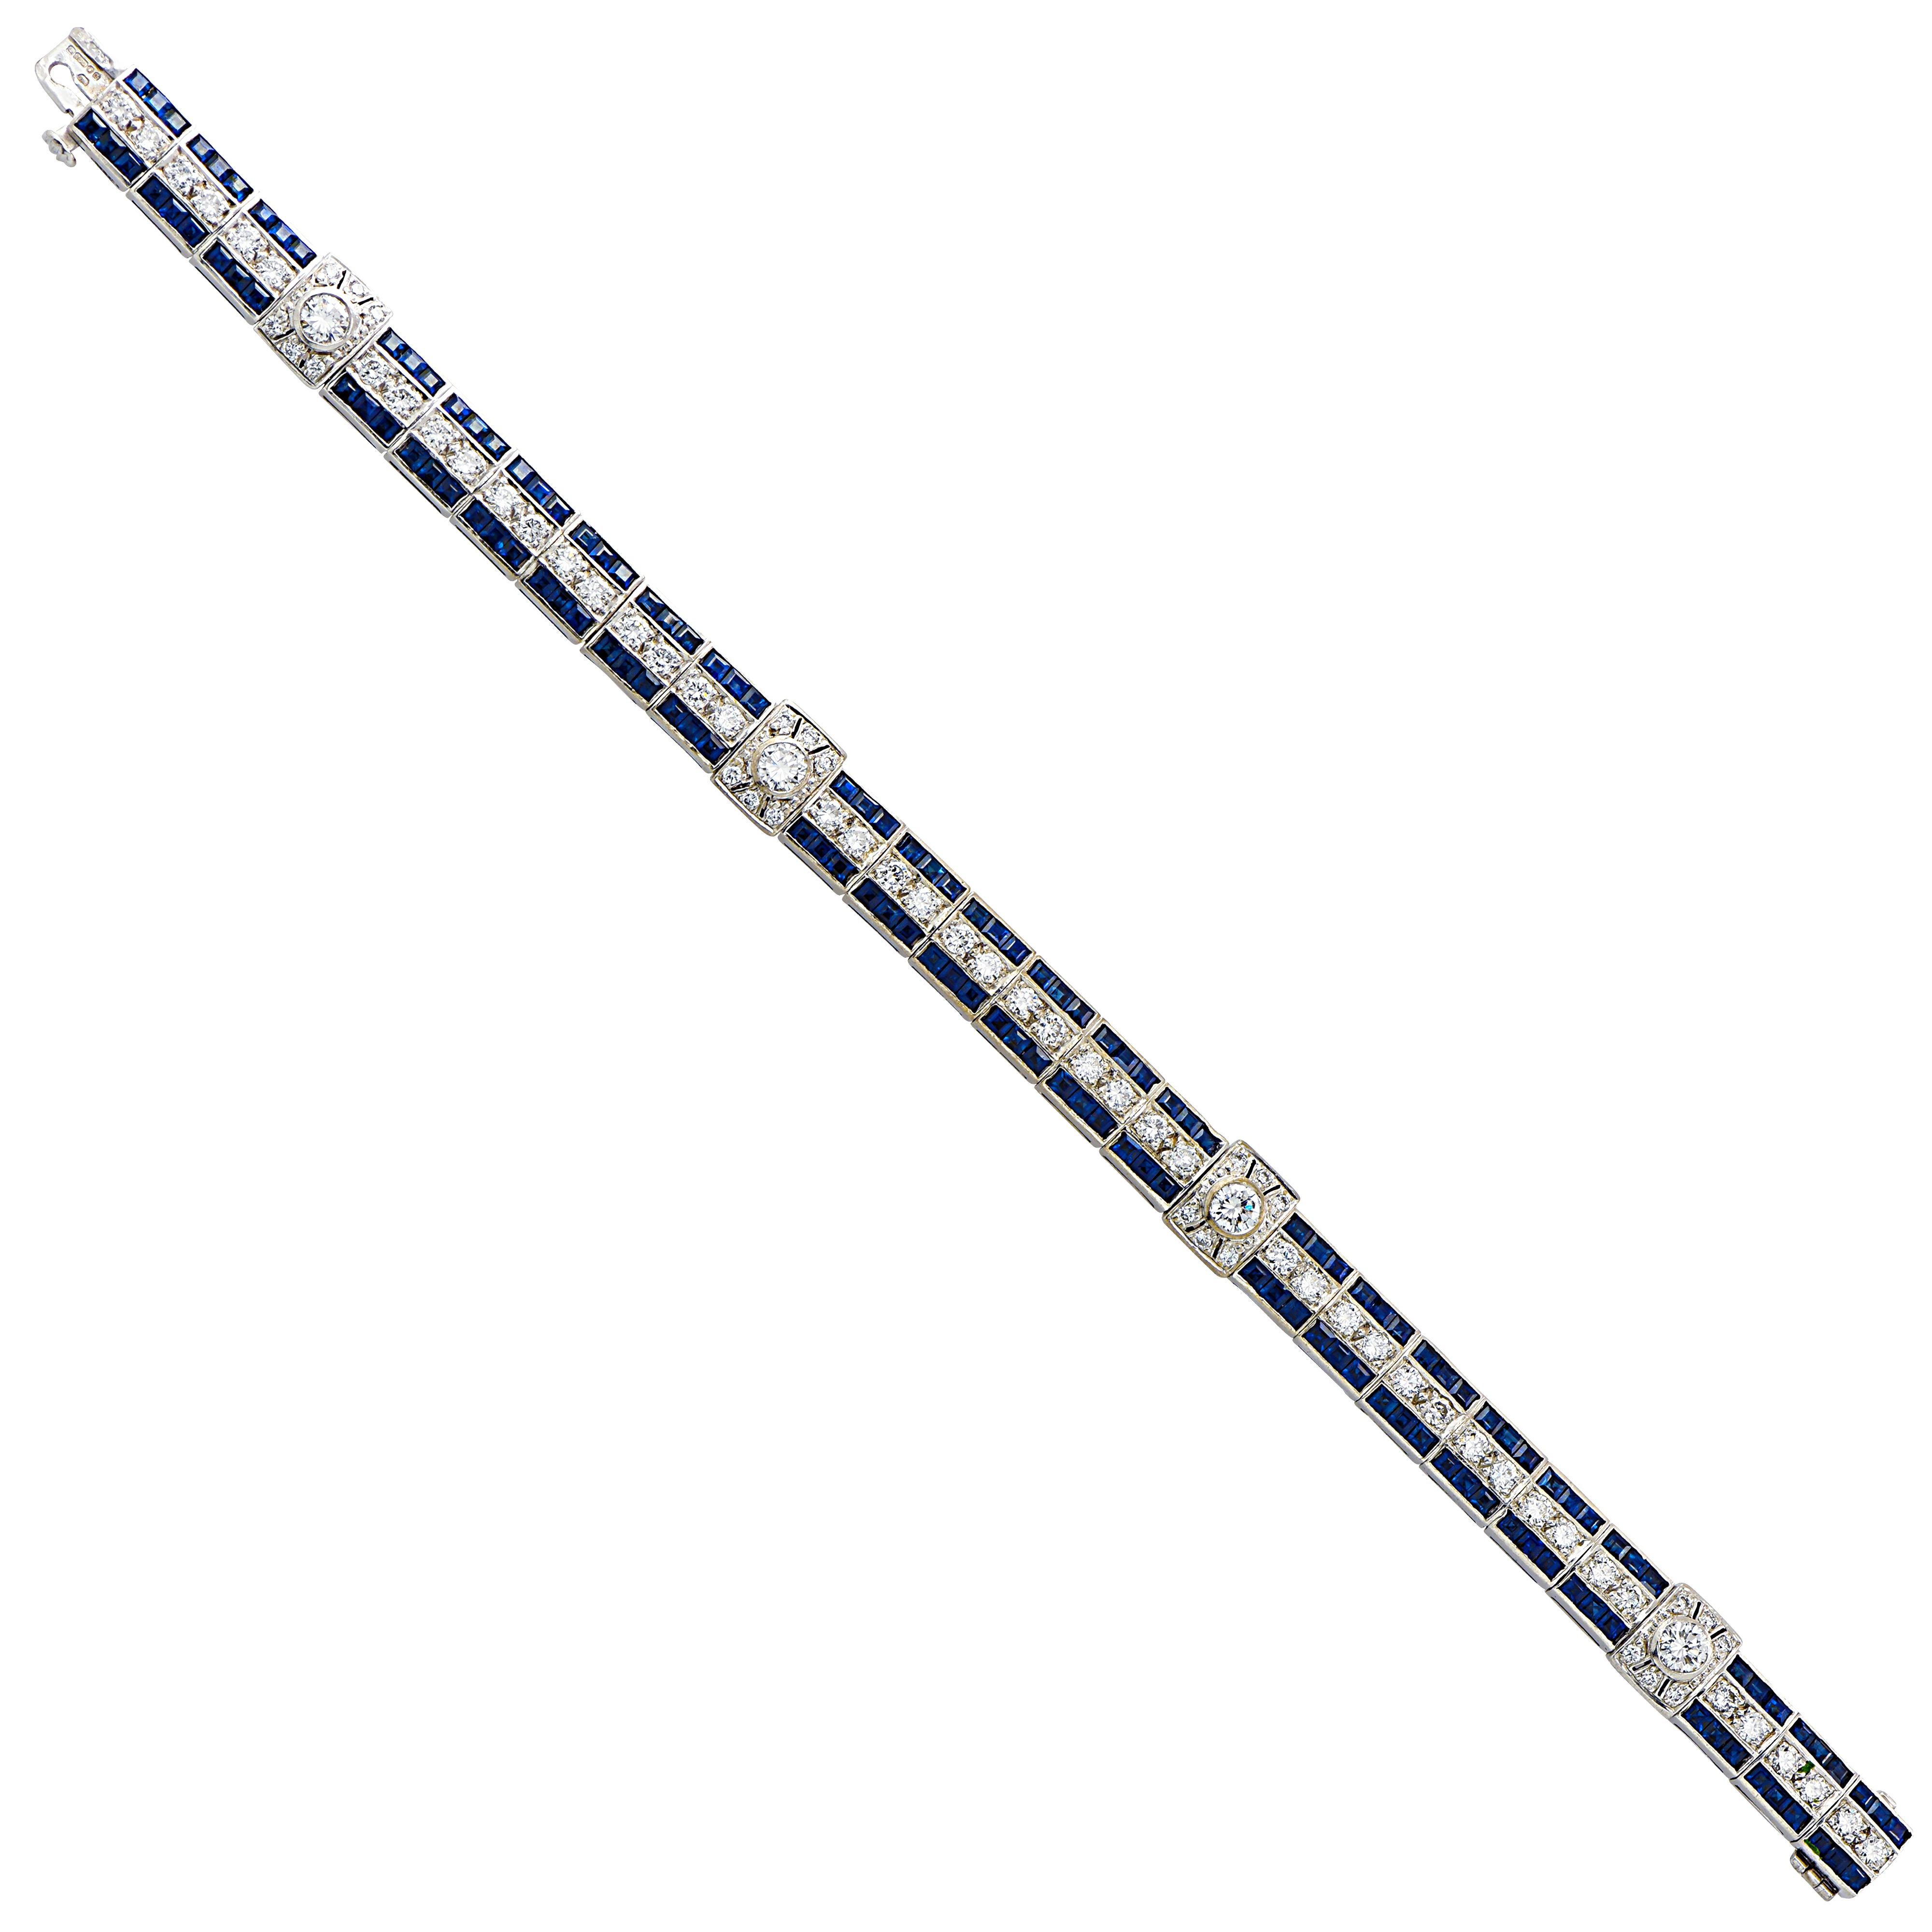 Sensational English bracelet crafted in platinum, featuring 52 round brilliant cut diamonds weighing approximately 3.4 carats total, G color, VS clarity, and 72 square blue sapphires weighing approximately 3 carats total. This striking bracelet